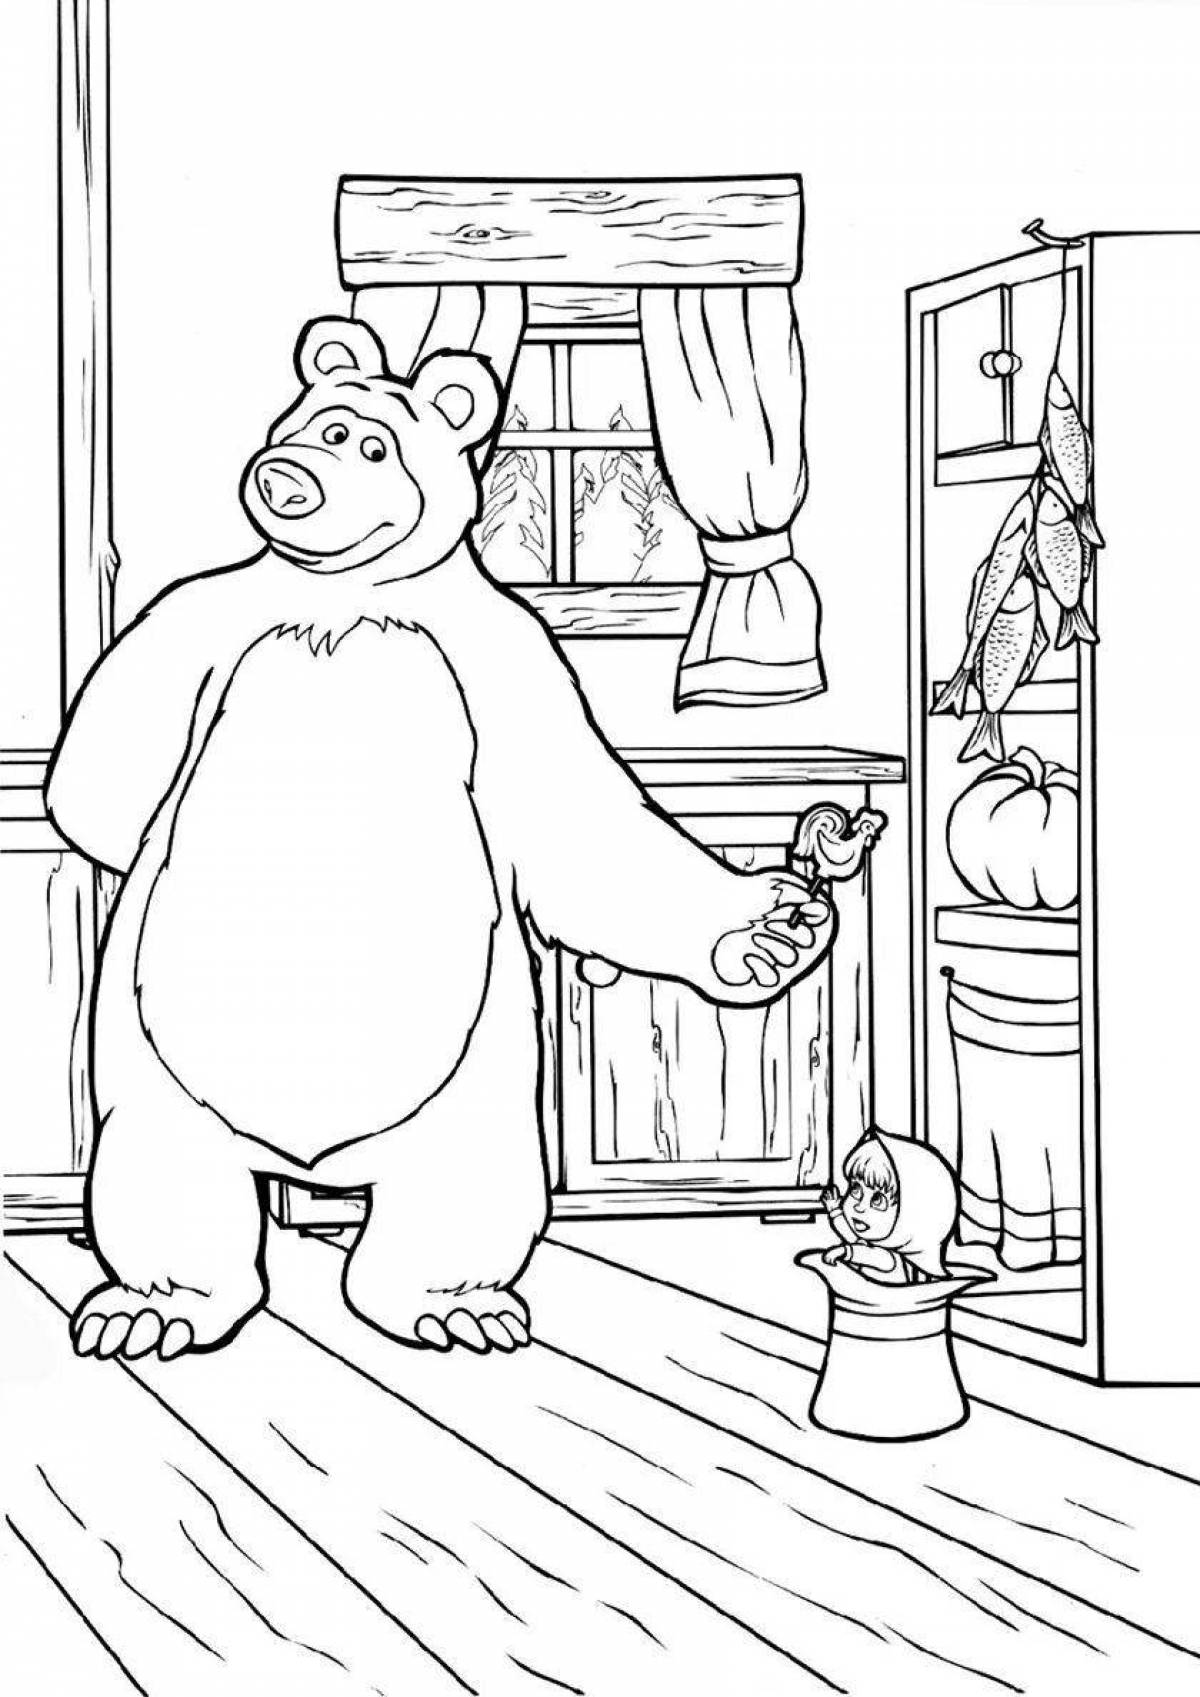 Coloring page gorgeous mouse and masha